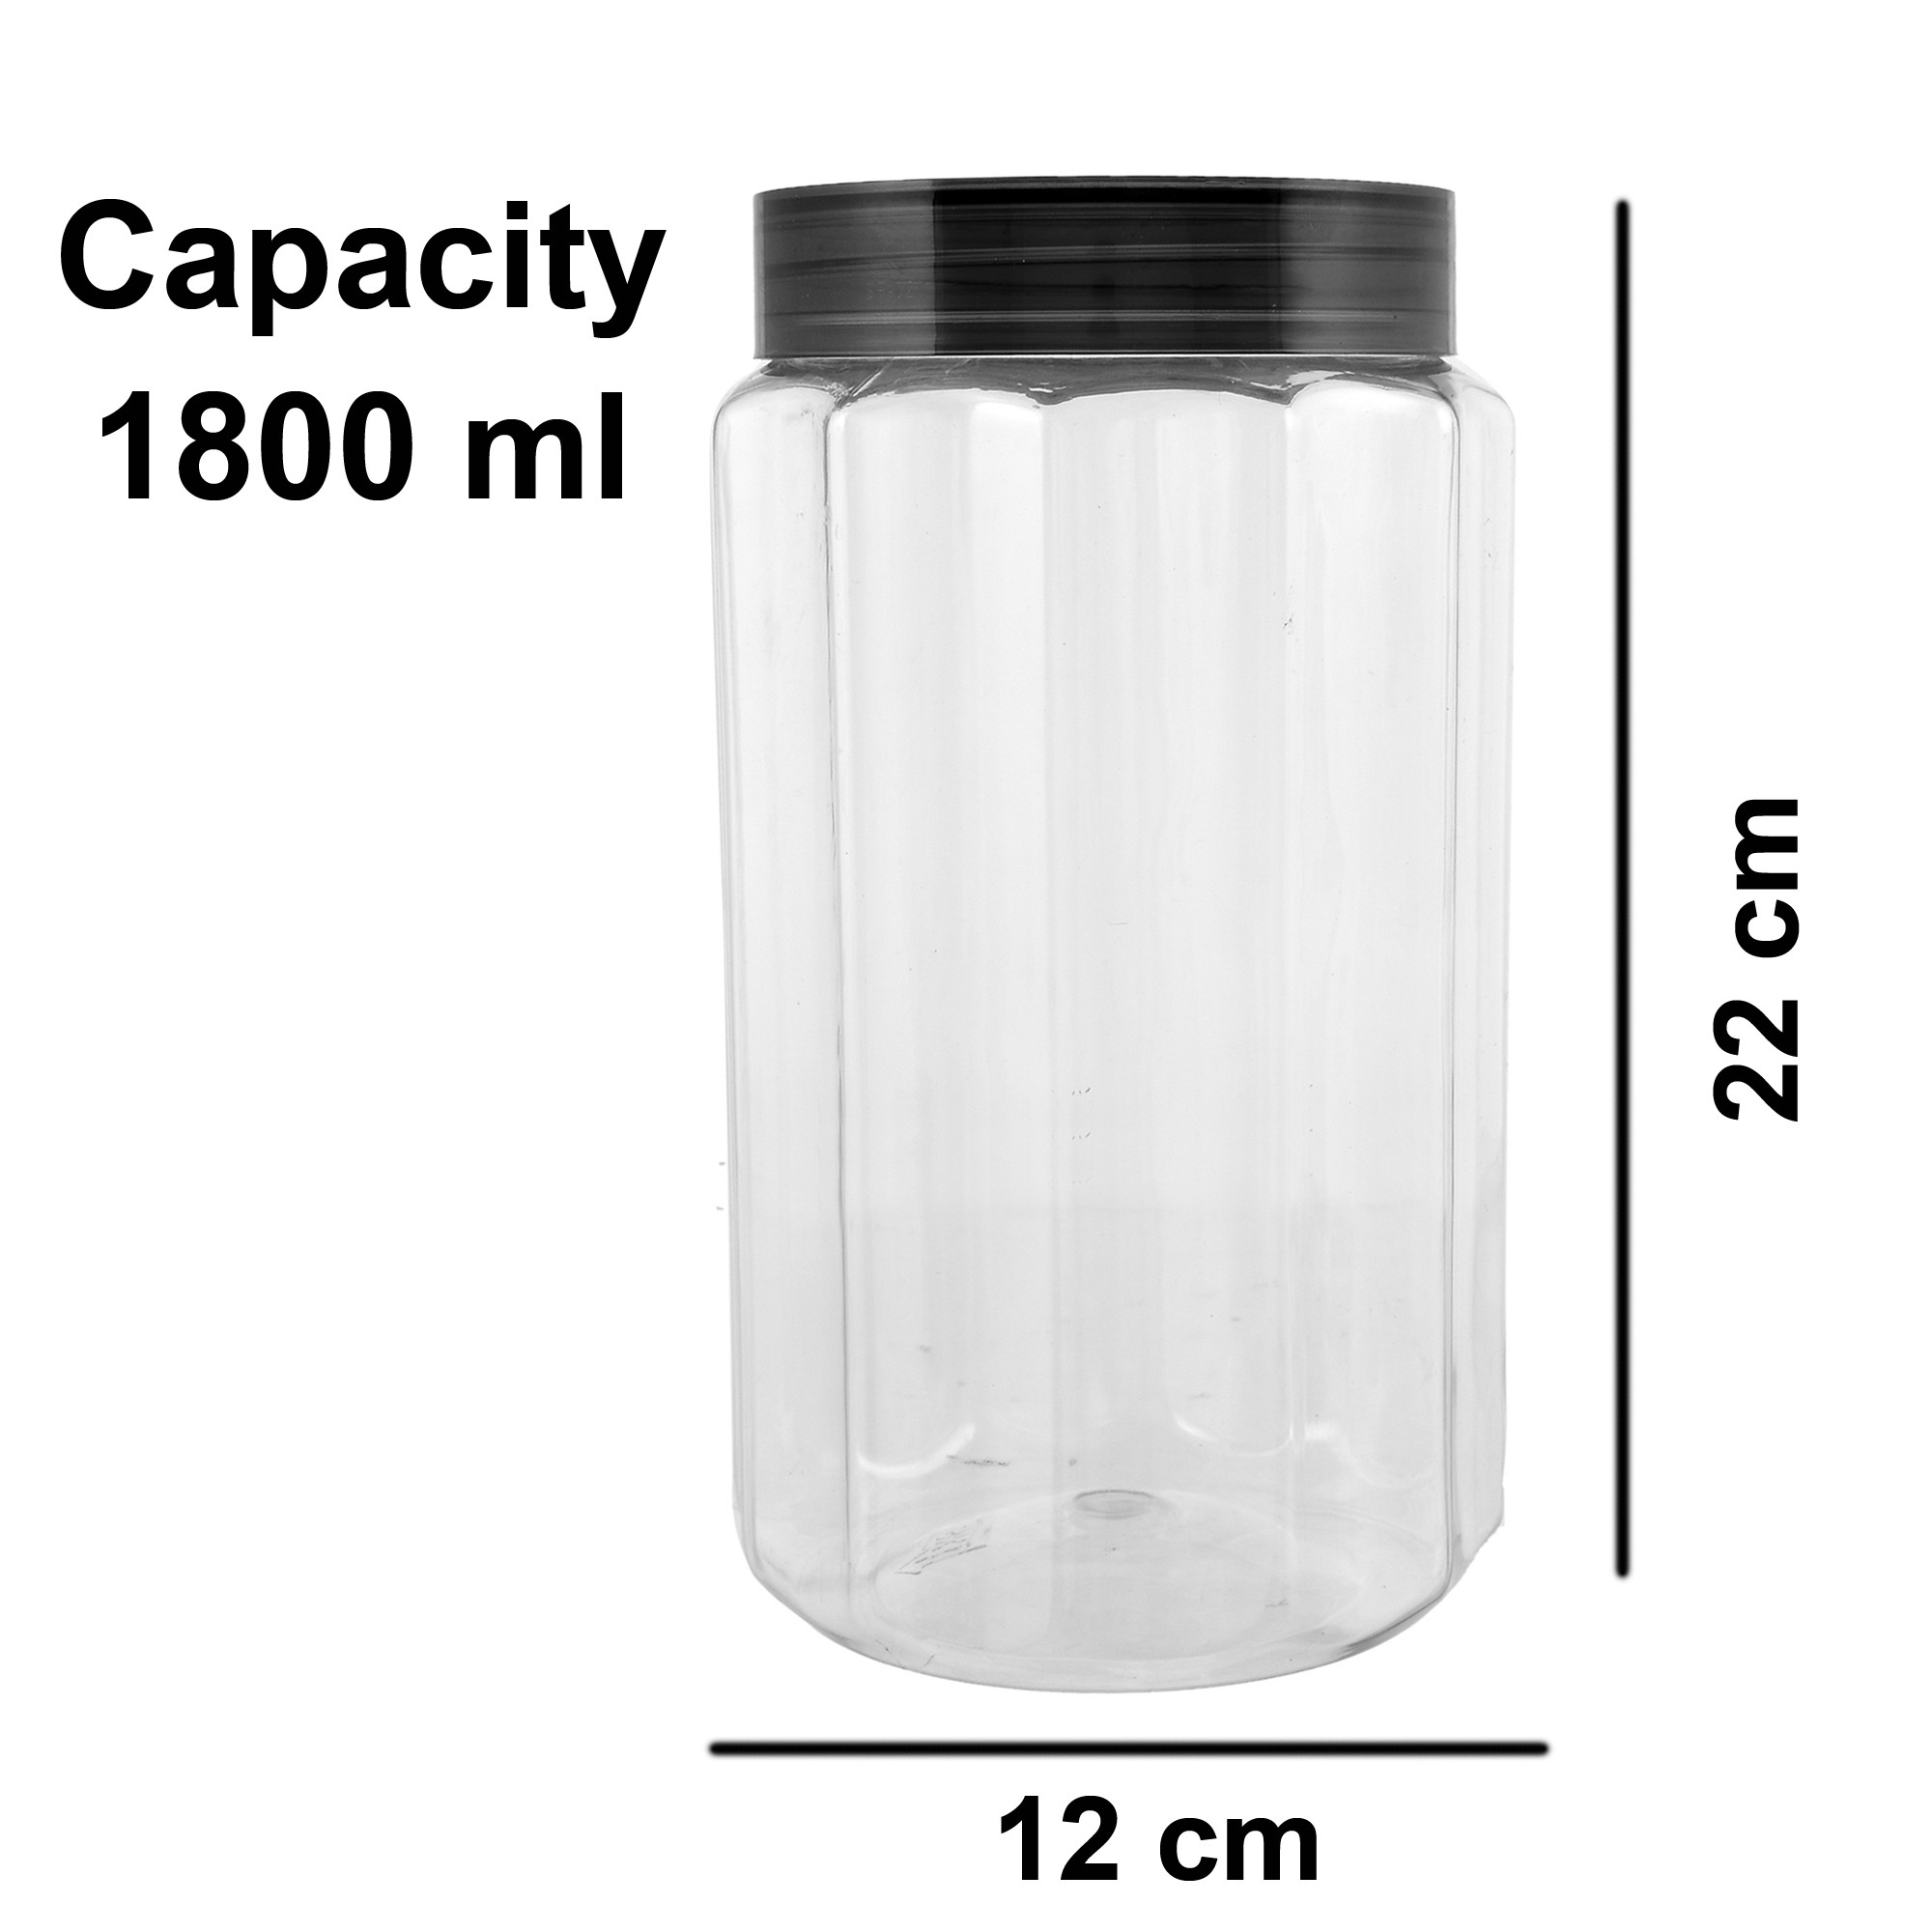 Kuber Industries Opal Airtight Food Storage Containers Kitchen Containers for Storage Set Plastic Storage Box for Kitchen Airtight Containers Storage Jar Set for Kitchen Storage (1800 ml, Grey)